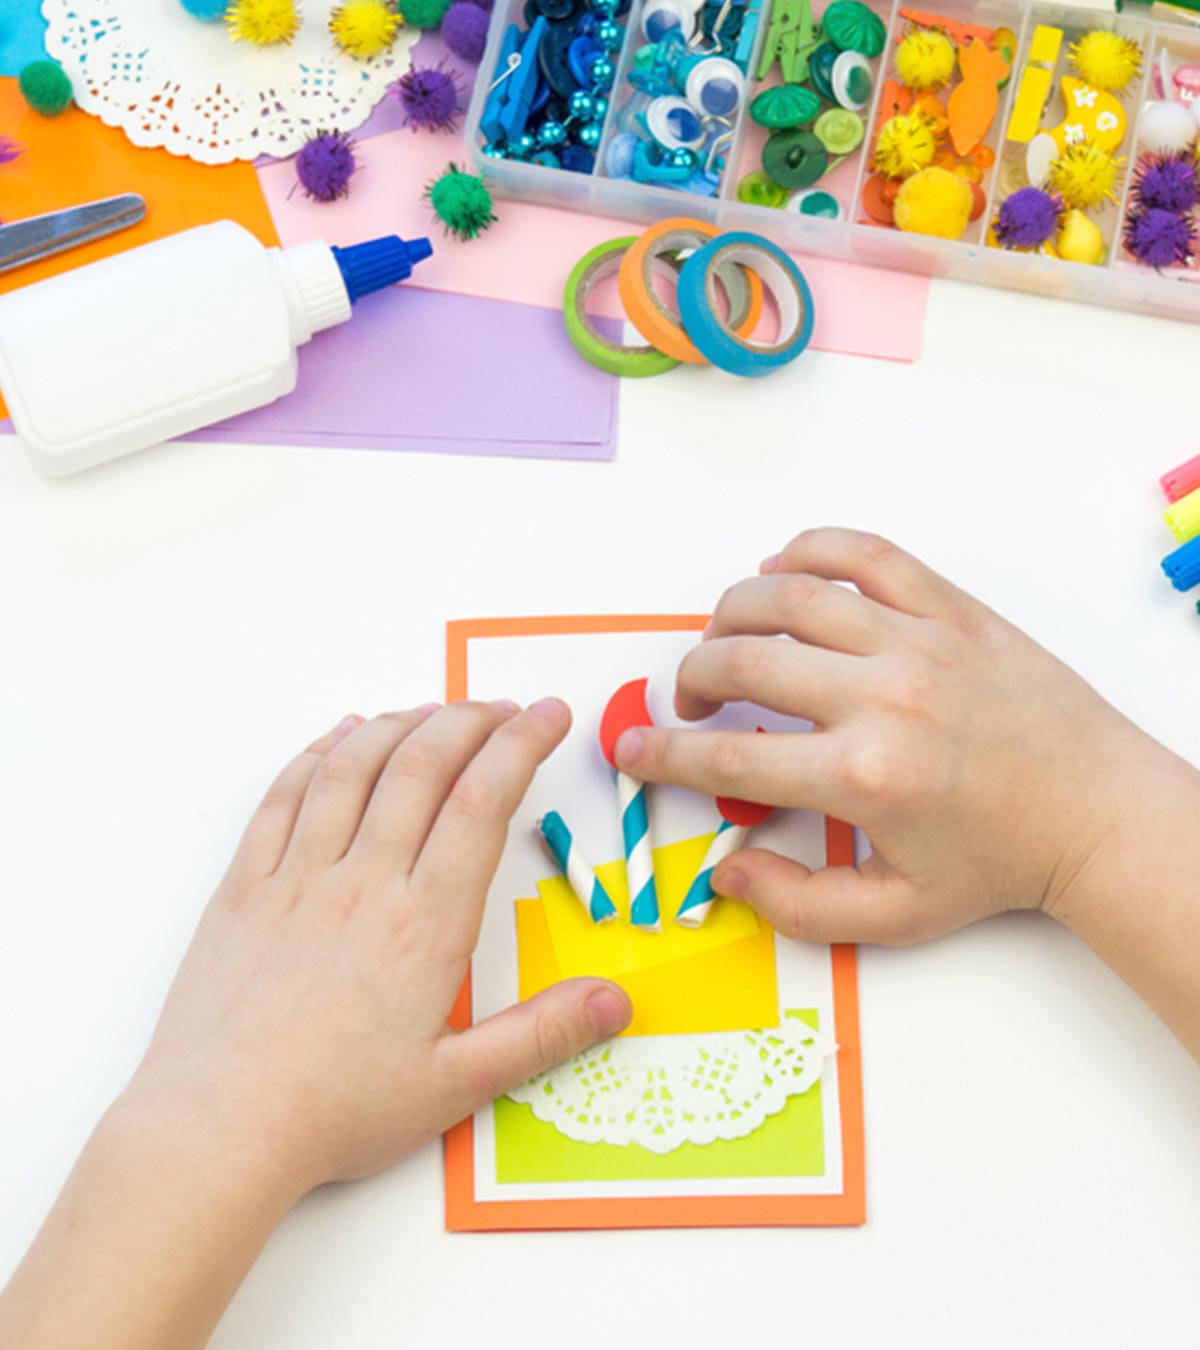 19 Easy DIY Birthday Party Crafts For Kids, With Images